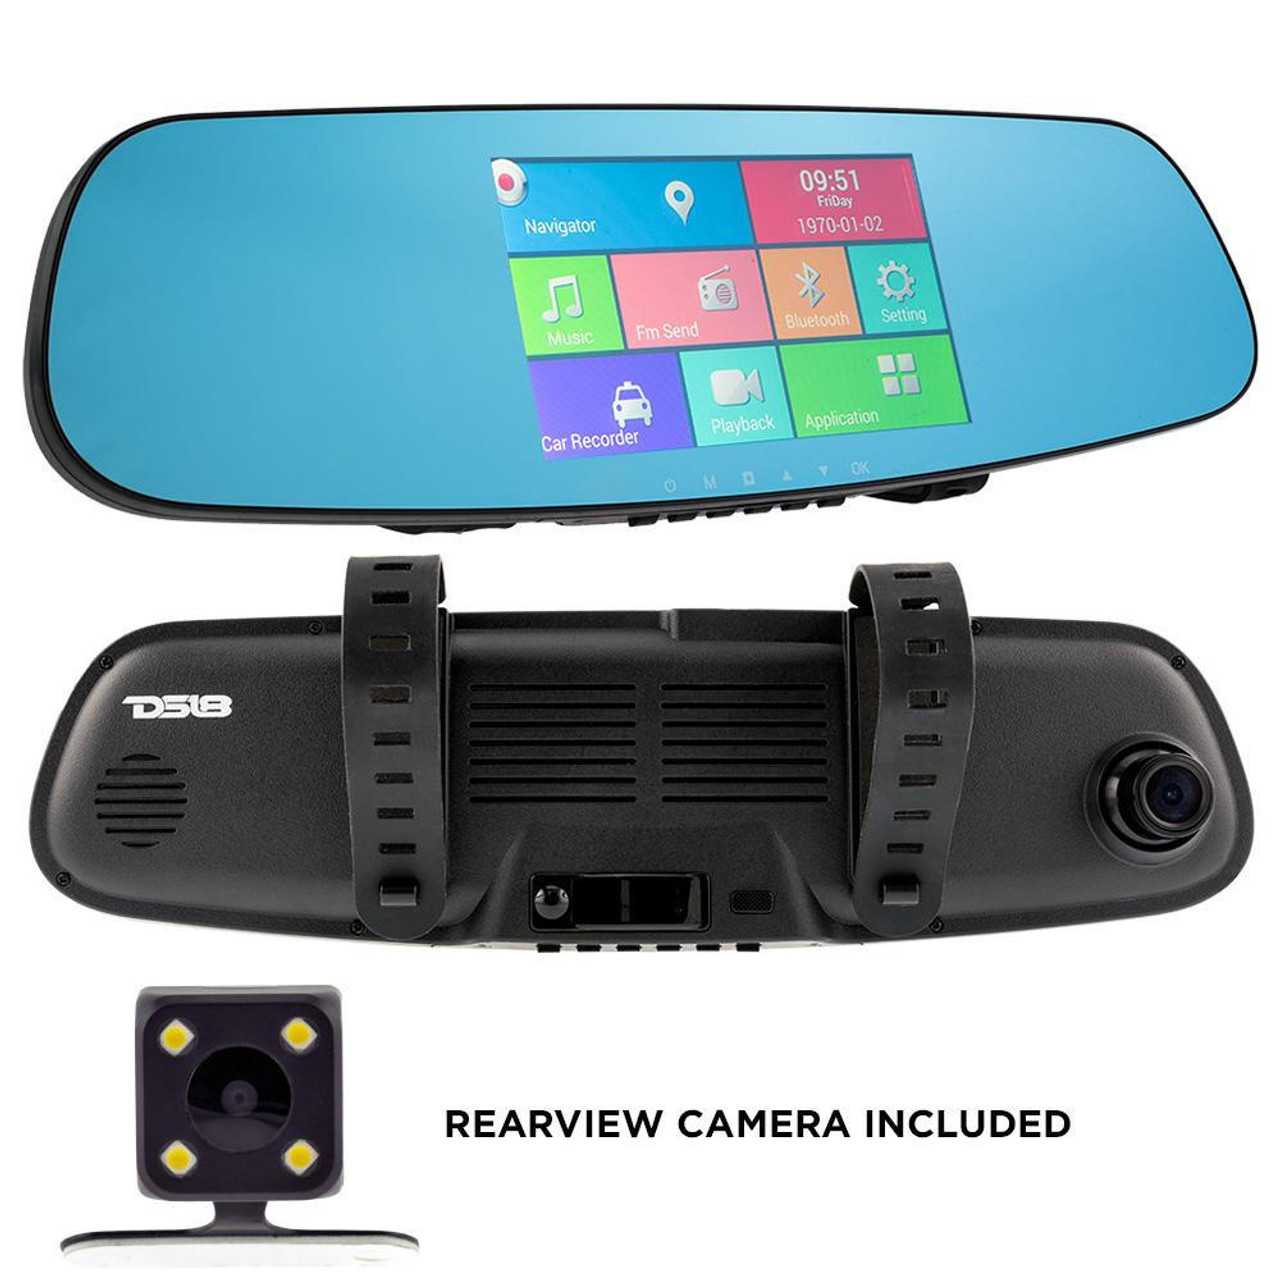 https://cdn11.bigcommerce.com/s-209k8v1/images/stencil/1280x1280/products/19139/38353/ds18-audio-rearview-mirror-dual-camera-4.3-hd-lcd-touch-screen-1080p-dash-cam-recorder-universal-mount-android-system-wifi__34957.1658934808.jpg?c=2